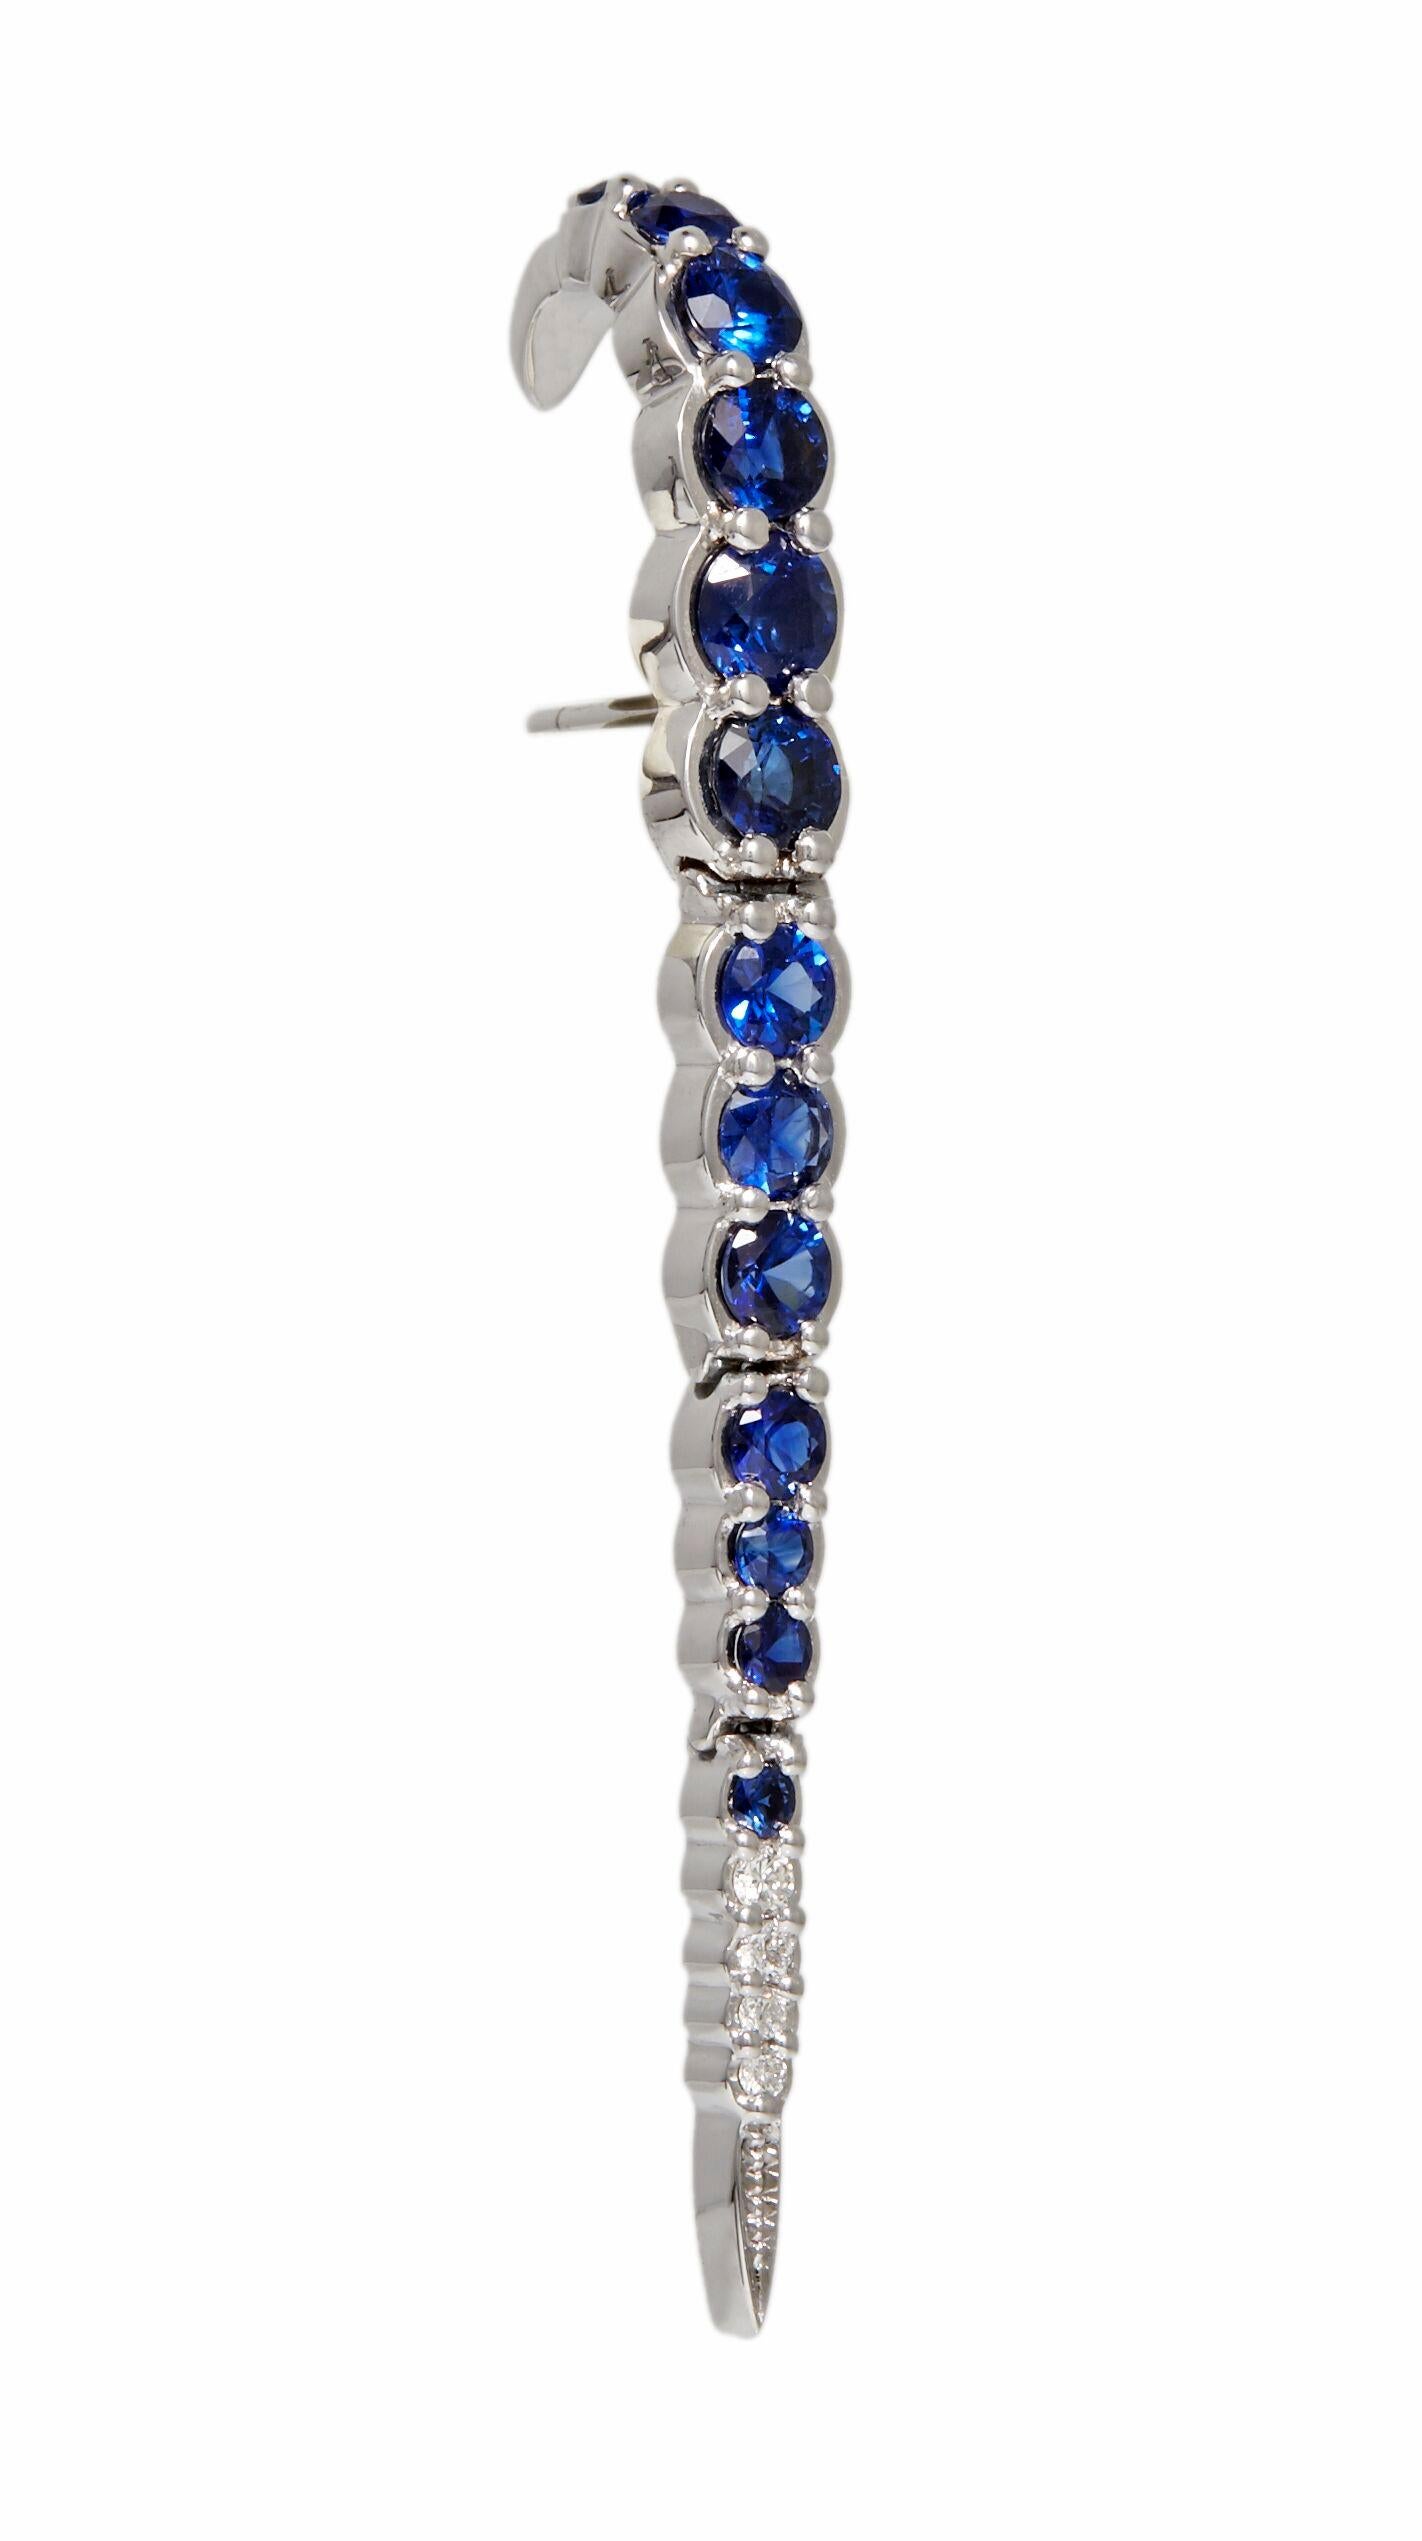 Designed exclusively by Ara Vartanian, this single earring has been created in 18K White Gold, with 3,09ct (three carats and nine points) worth of Blue Sapphires in a inverted round faceted cut, along with four accented White Diamonds in a round